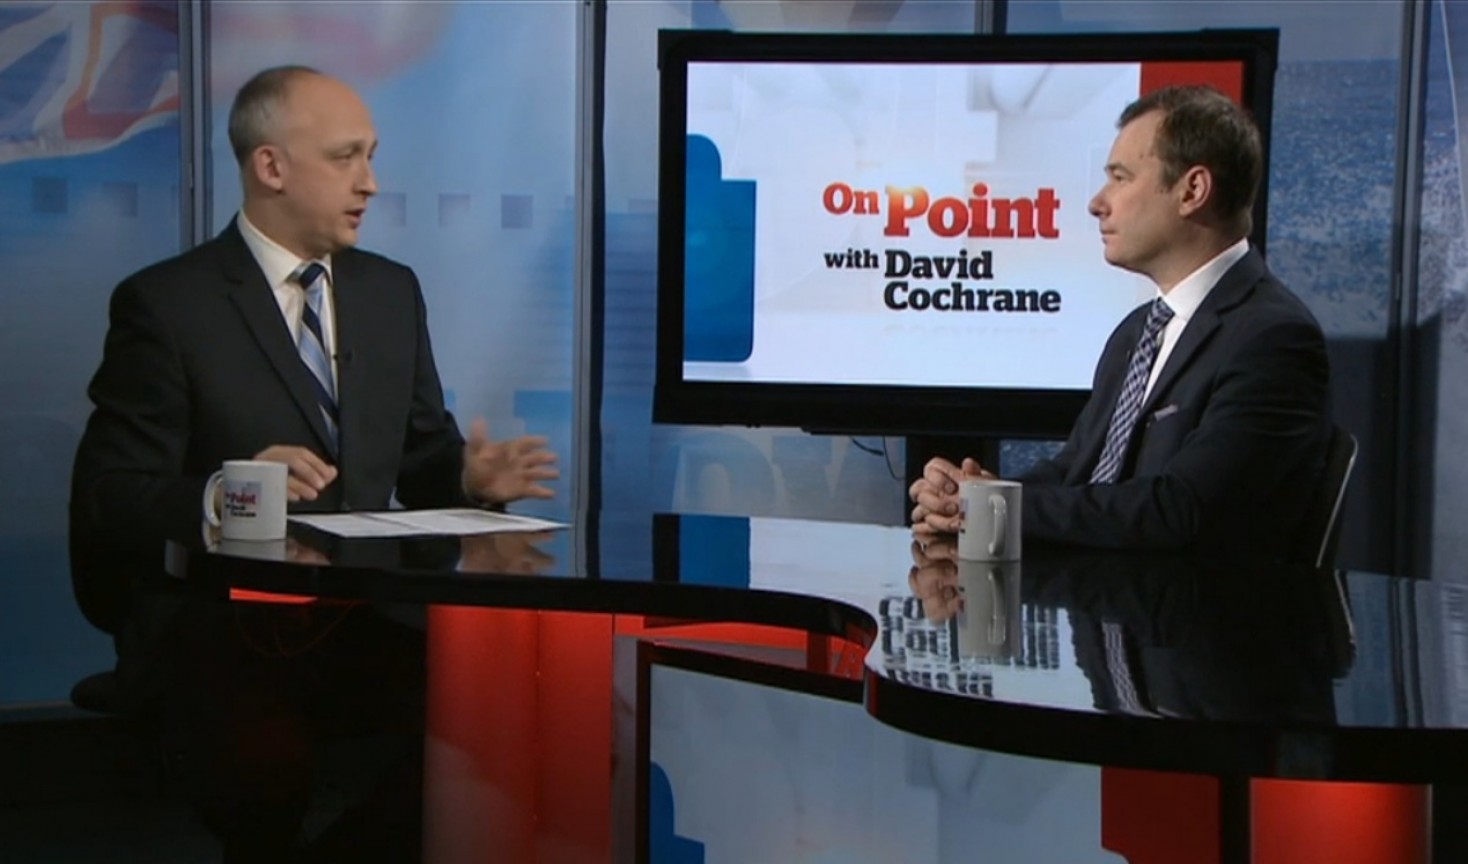 Richard Alexander discusses province’s finances on this week’s On Point with David Cochrane